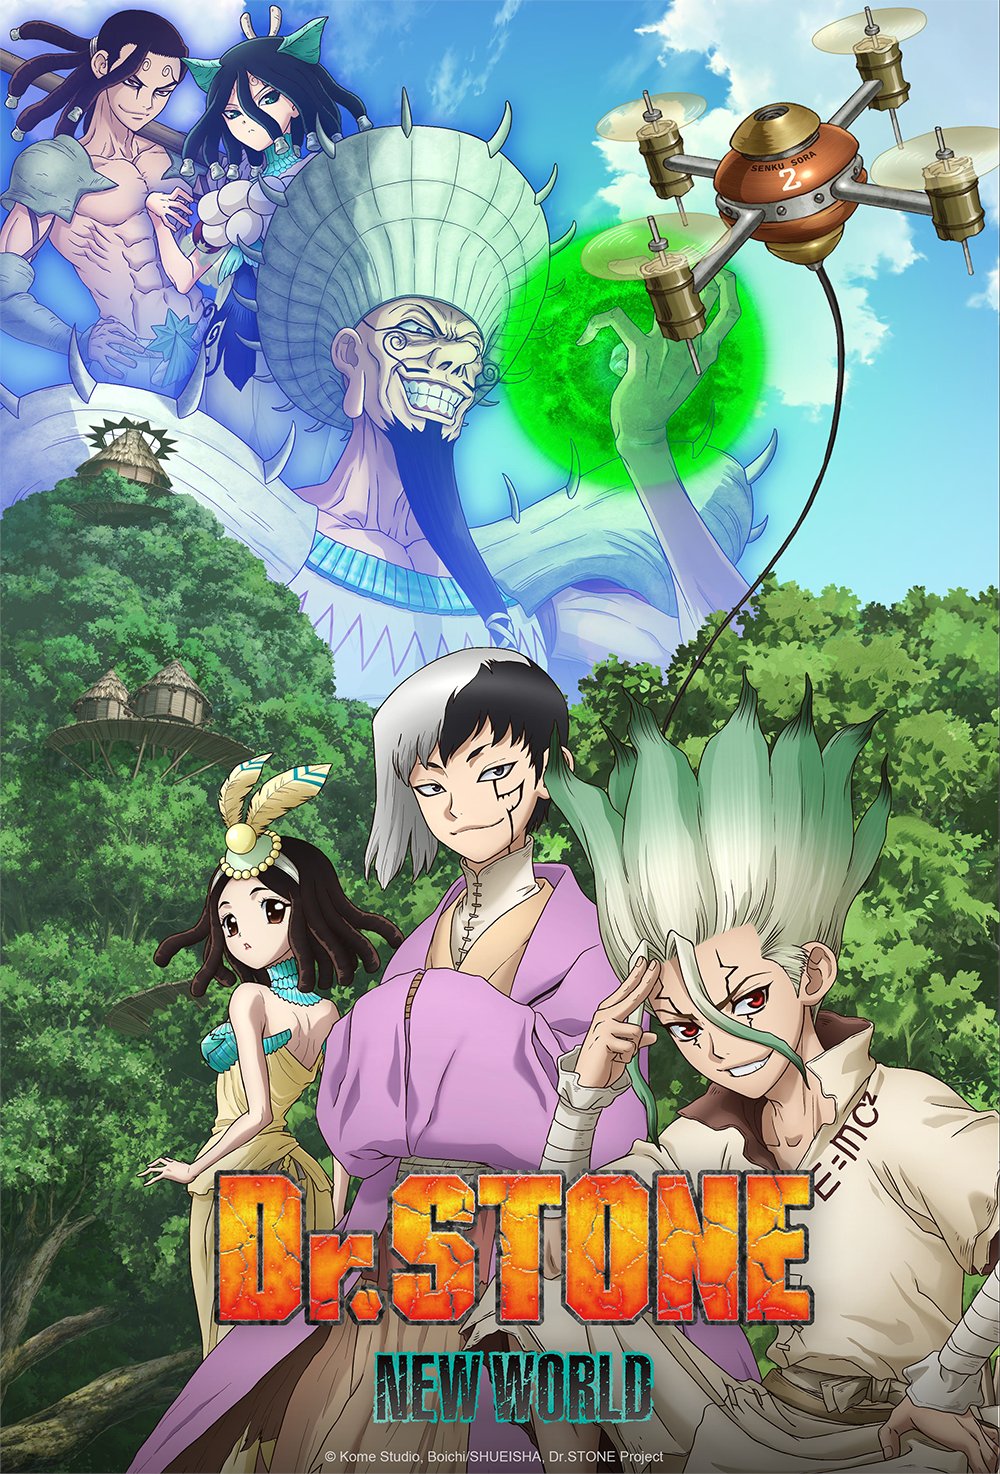 Dr Stone New World tiet lo hinh anh quan trong